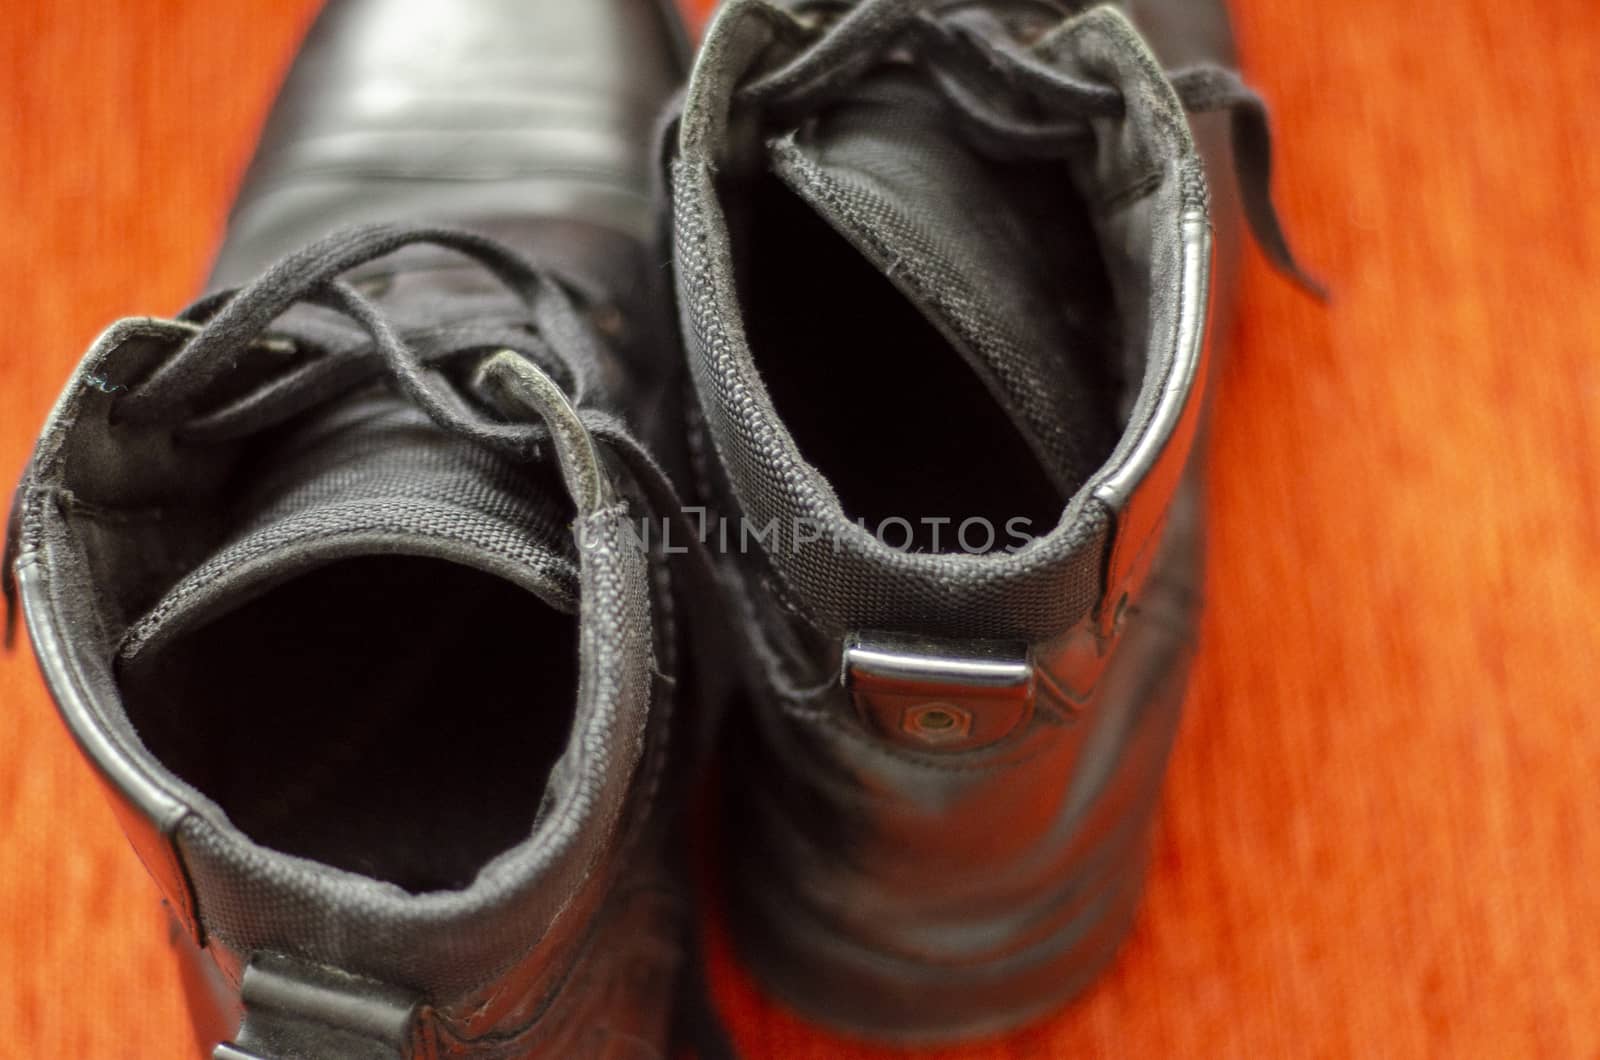 Old Black Leather Boots, Vintage by Hasilyus